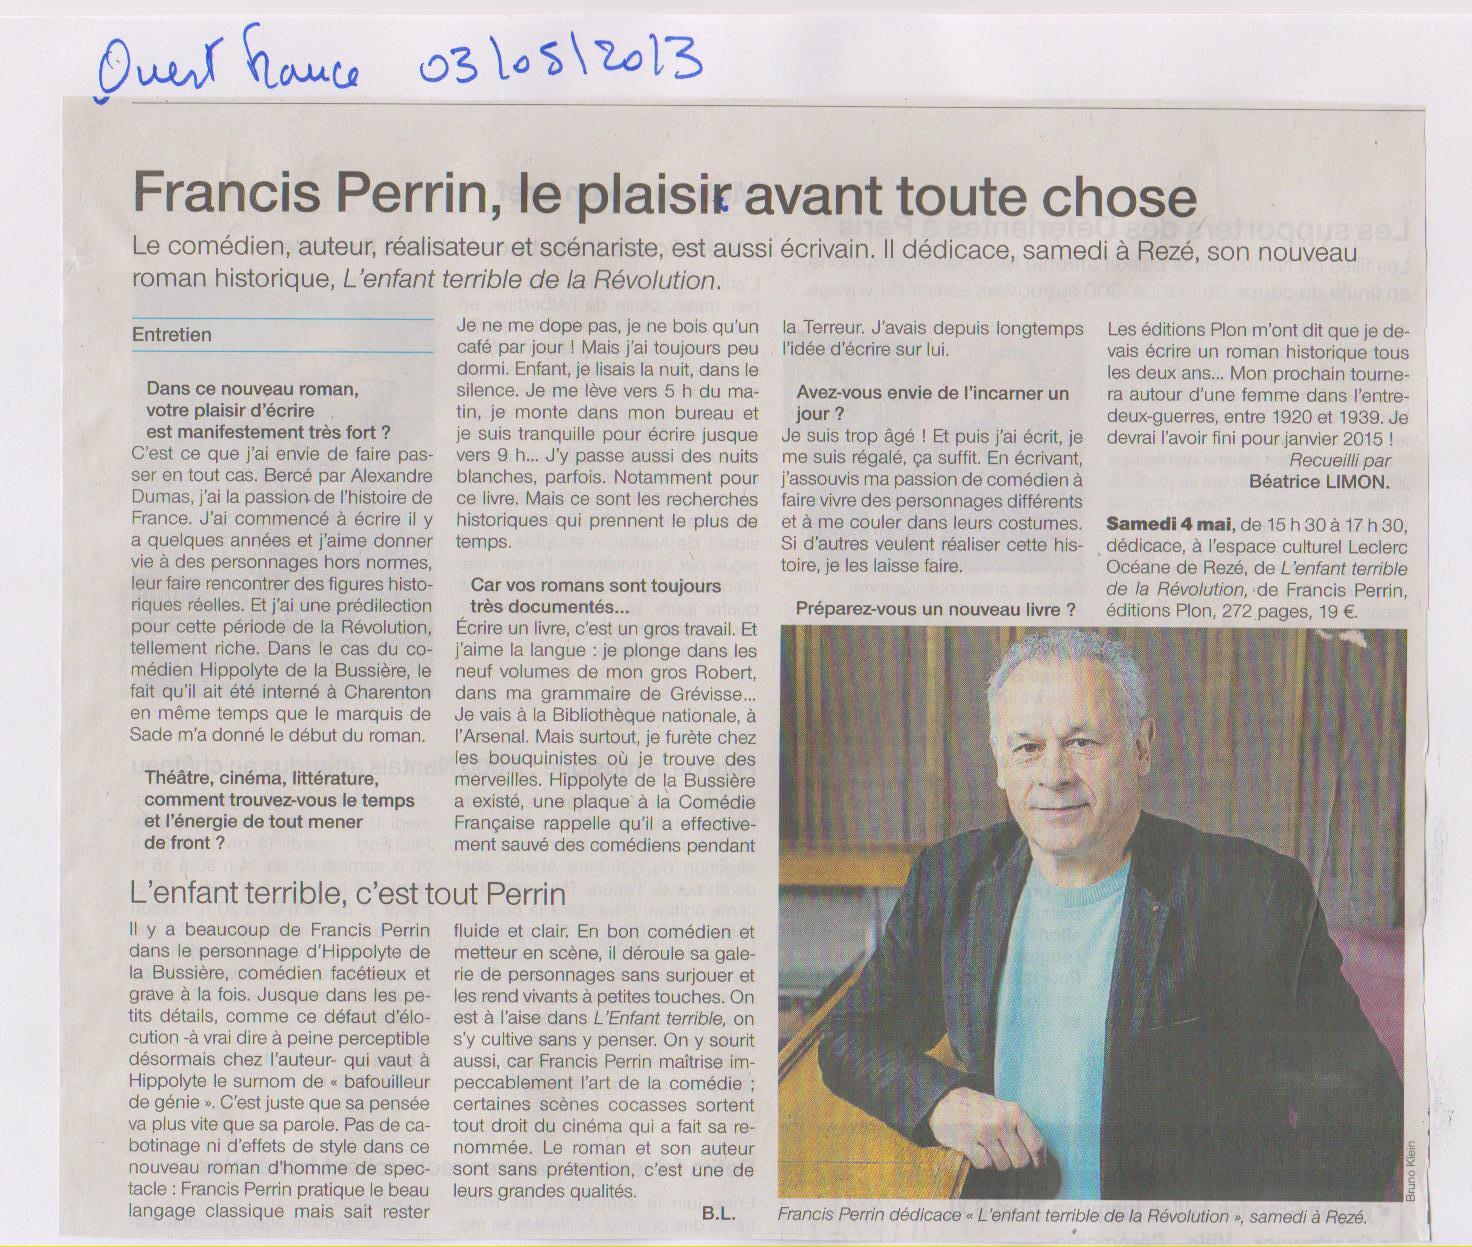 03.05.2013 - FRANCIS PERRIN - OUEST FRANCE